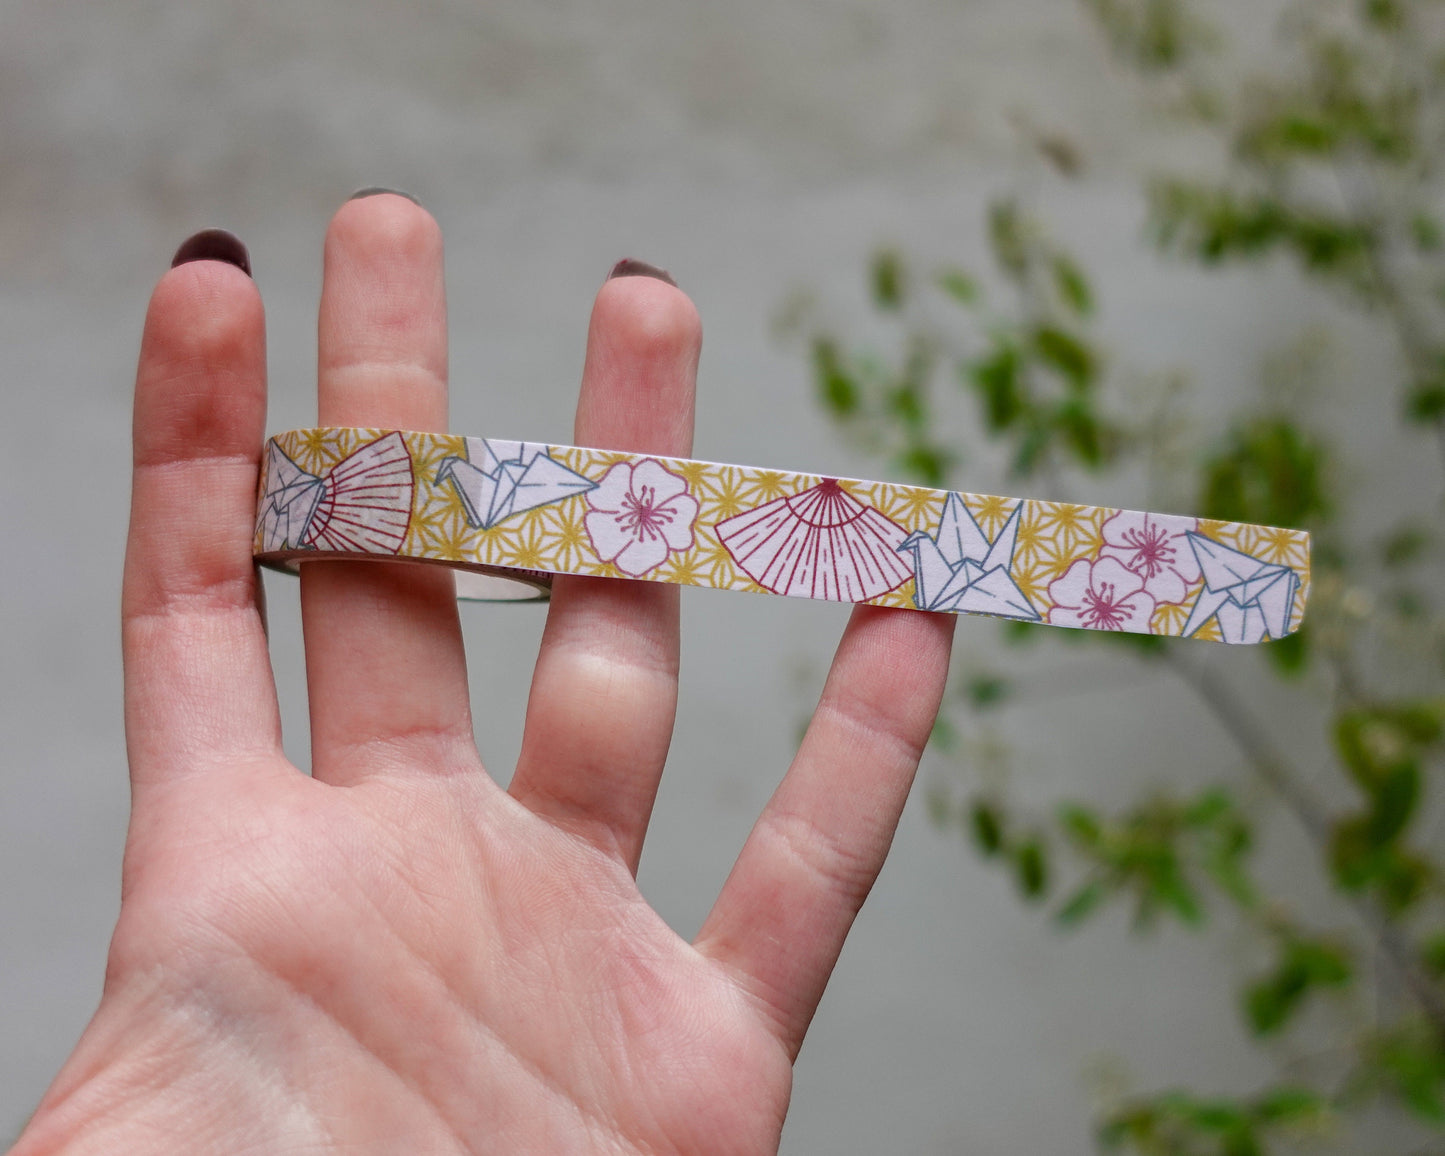 Spring in Japan – Cherry Blossom Washi Tape